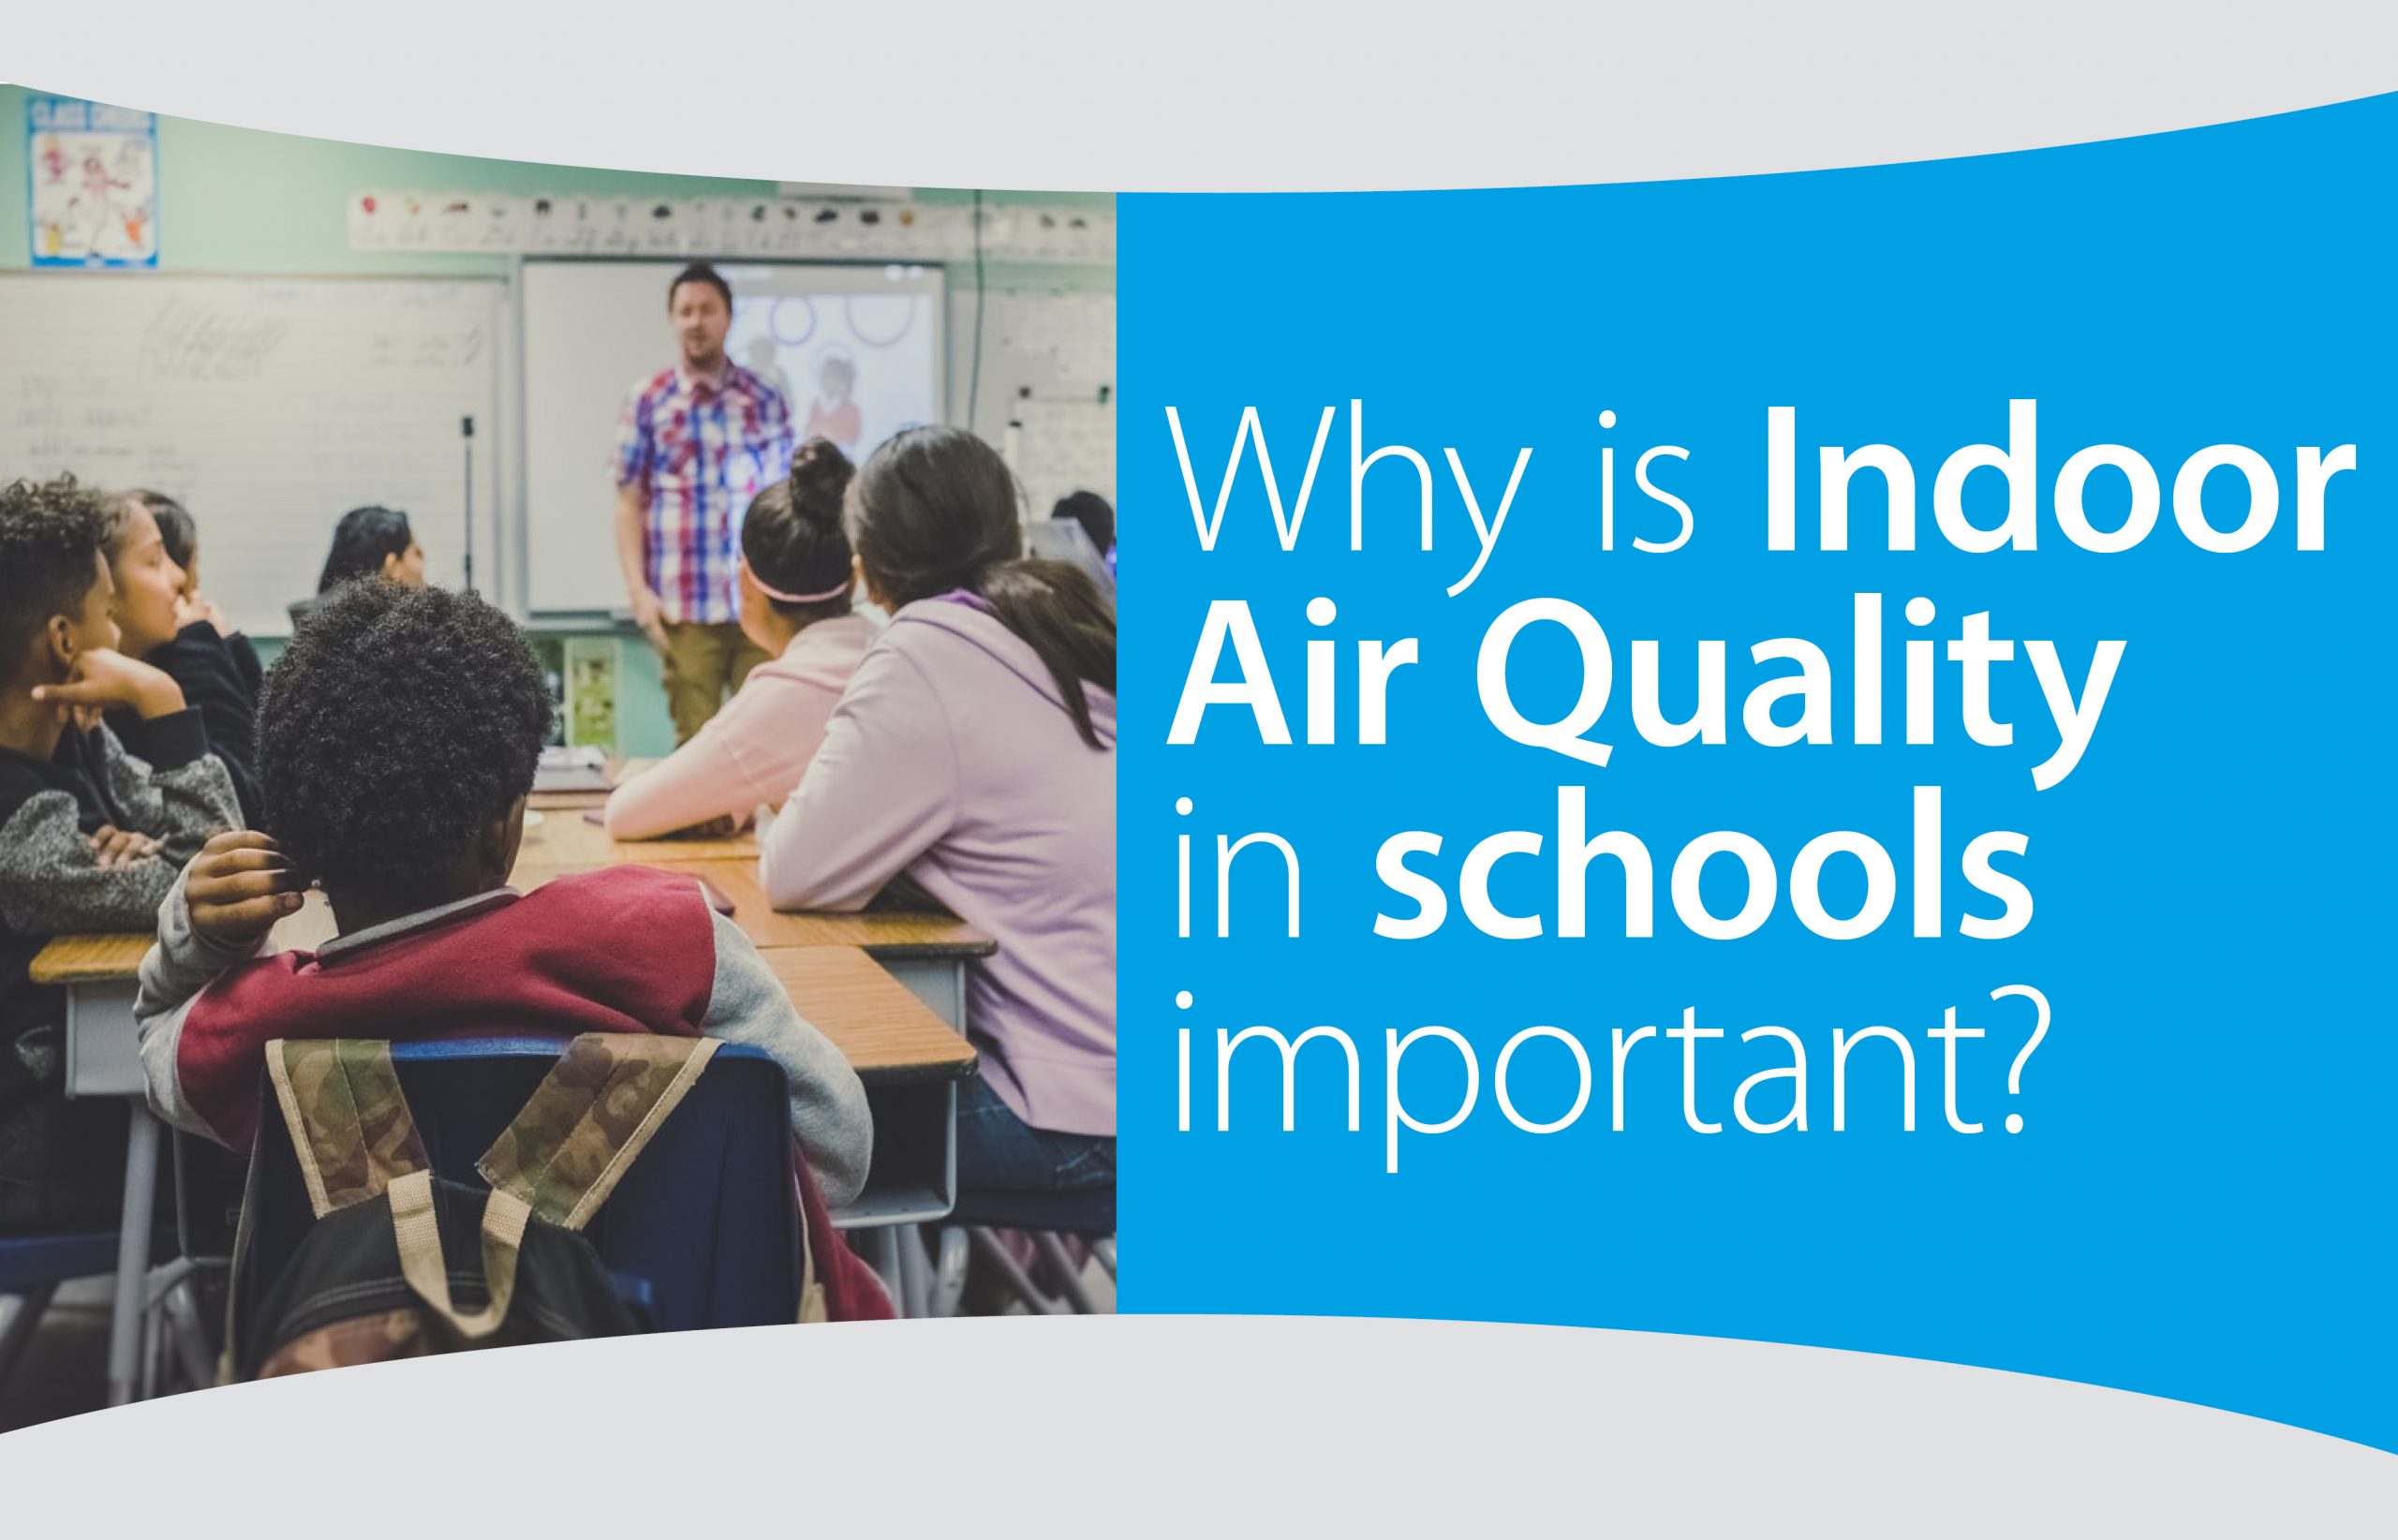 Why is indoor air quality in schools important?